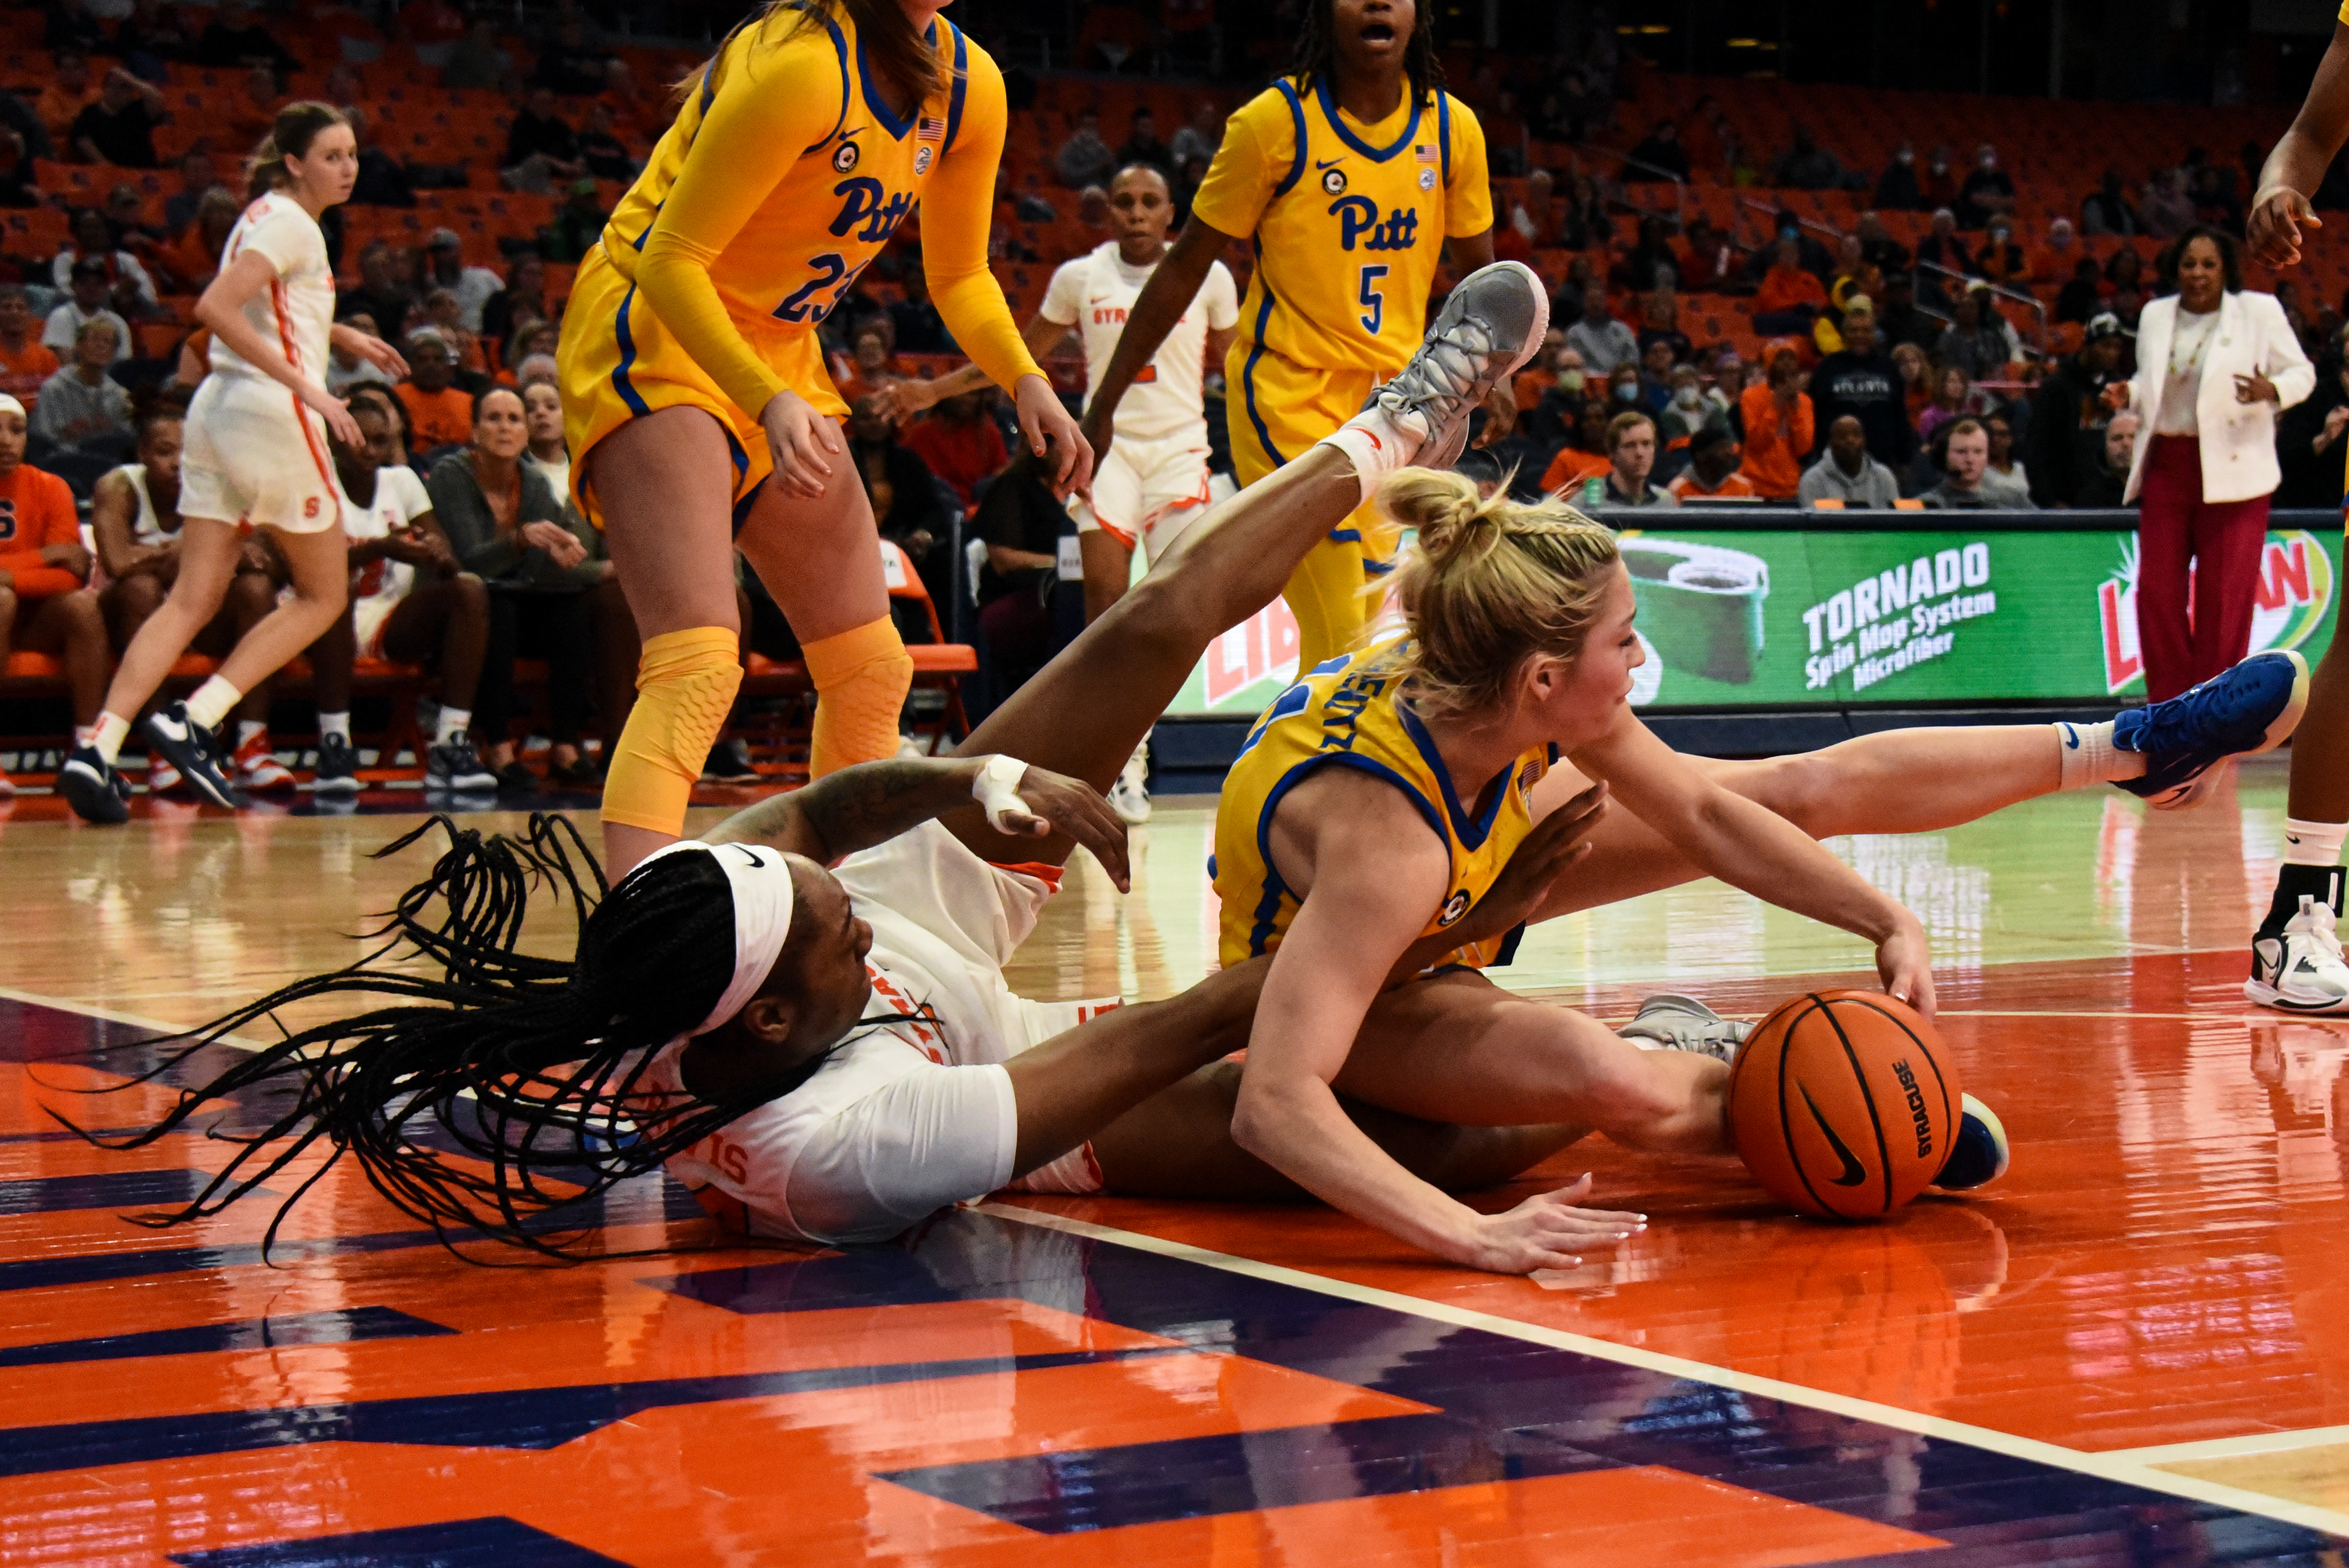 Syracuse forward Dariauna Lewis falls with a Pitt player during the Orange's win Wednesday at the JMA Wireless Dome.